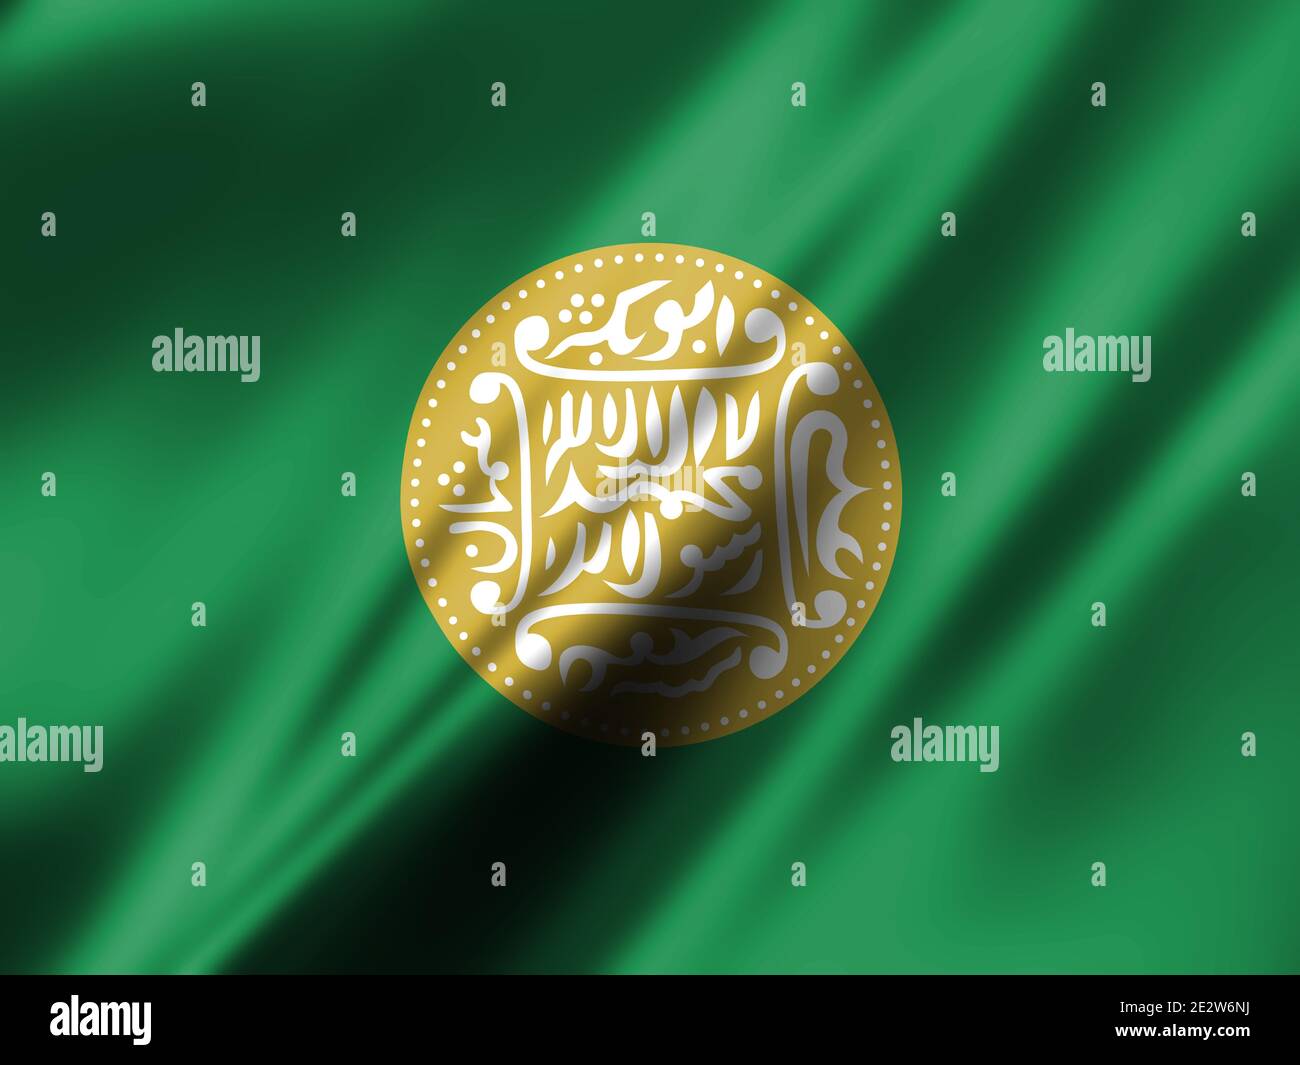 Rohingya flag waving in the wind, Close-up Stock Photo